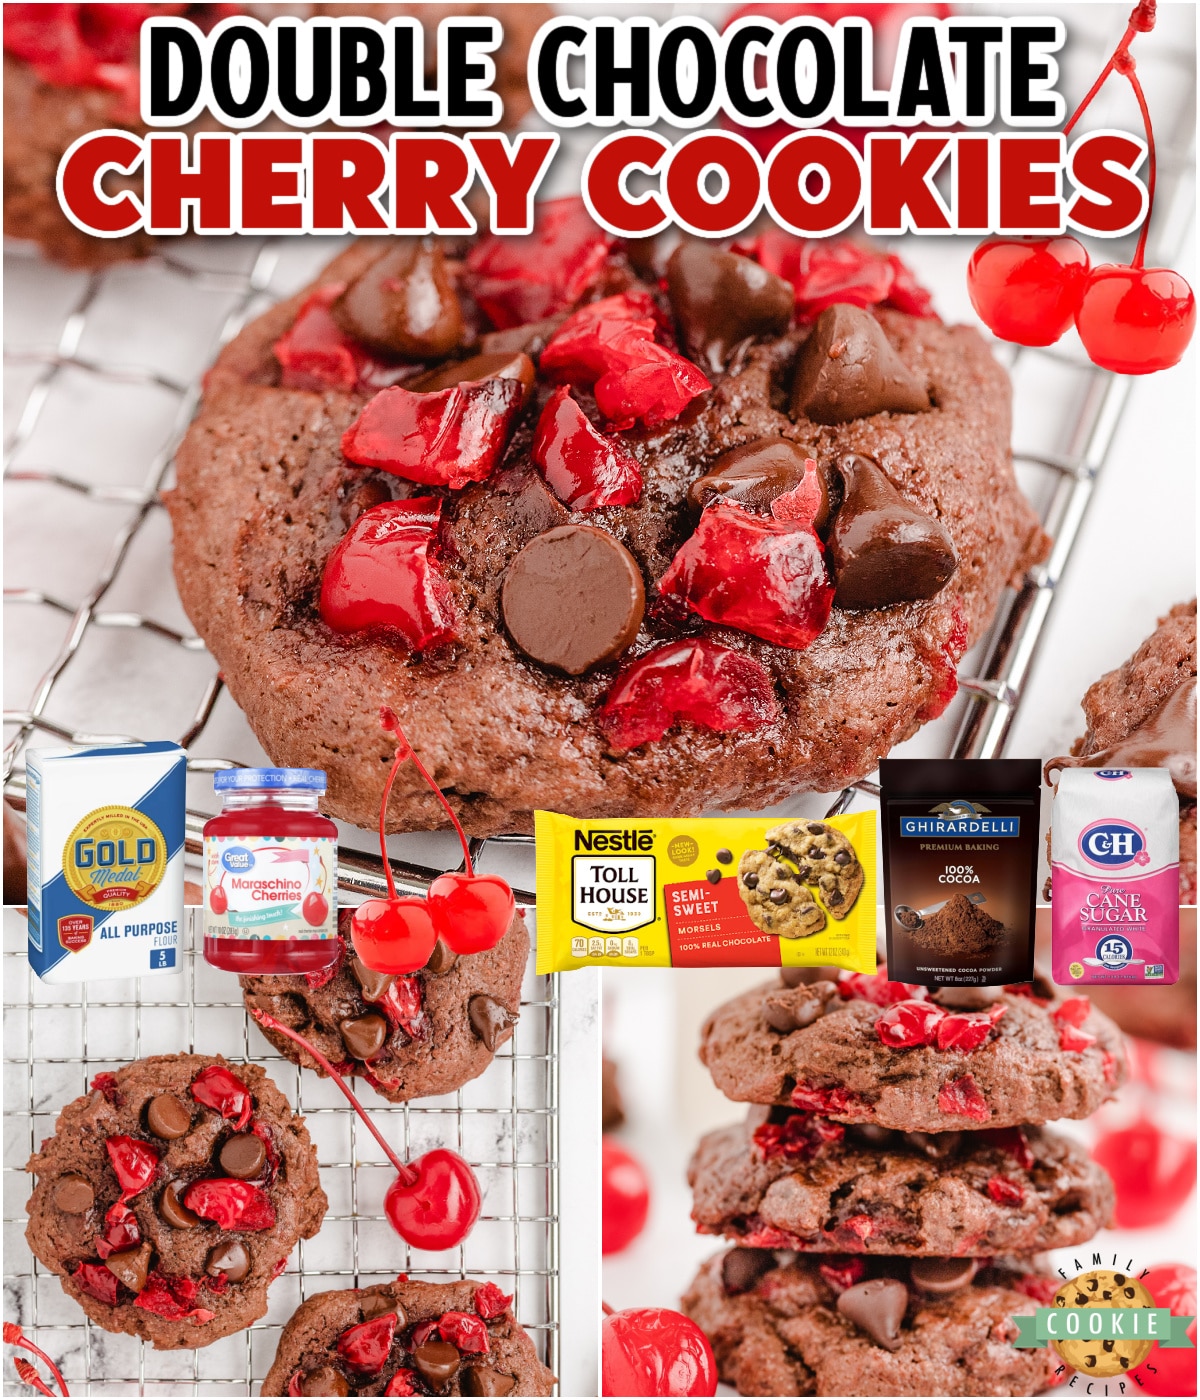 Chocolate Cherry Cookies are Black Forest Cake in cookie form! Soft & chewy chocolate cookies with chocolate chips & cherry bits!